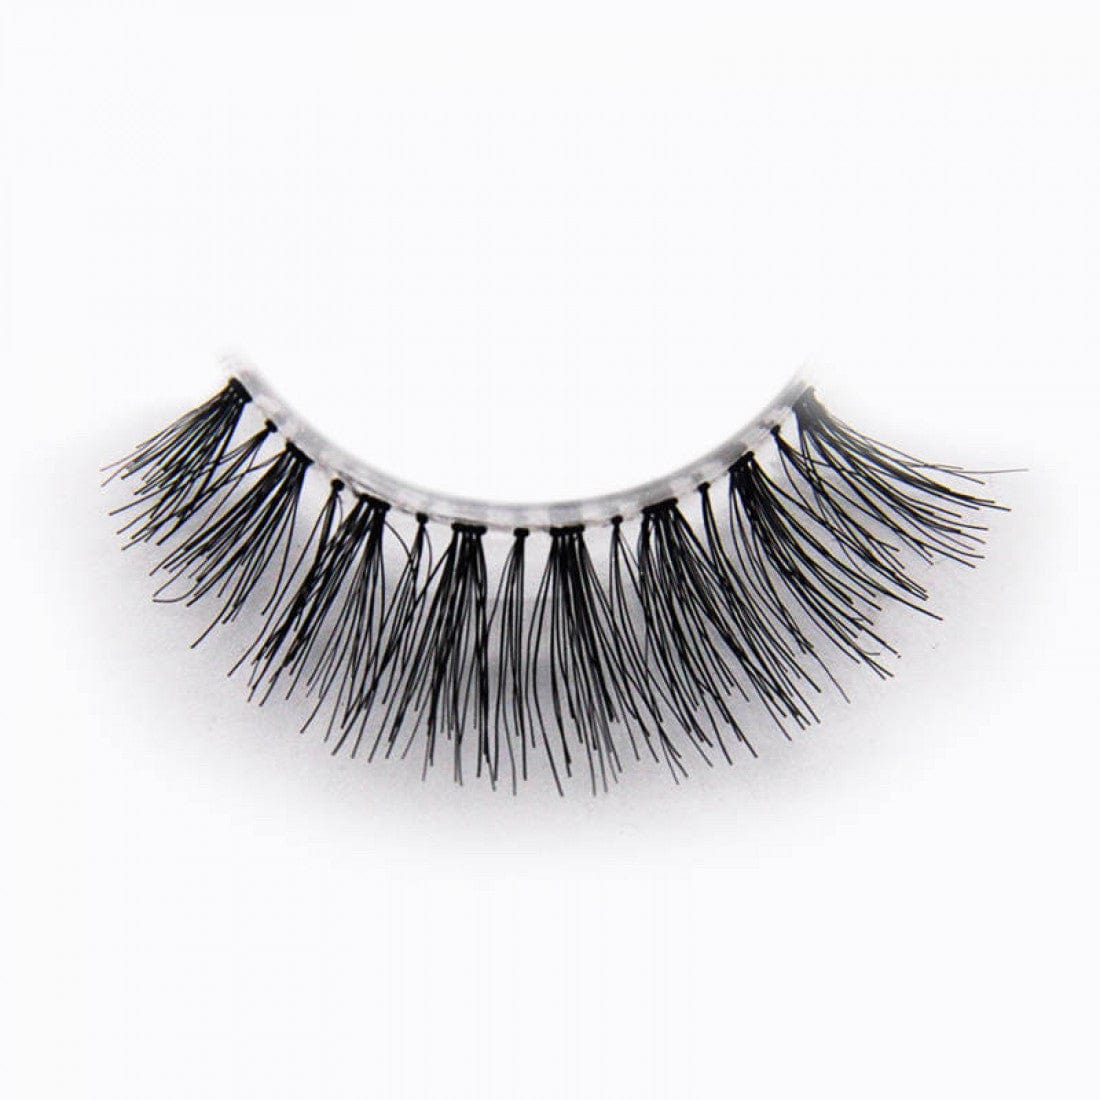 kumari cosmetics best human hair false and fake strip eyelashes natural look easy to apply and comfortable for makeup artist, lash beginner makeup beginner makeup lover in cheaper price. false our false lashes brand is high quality lowest price in australia